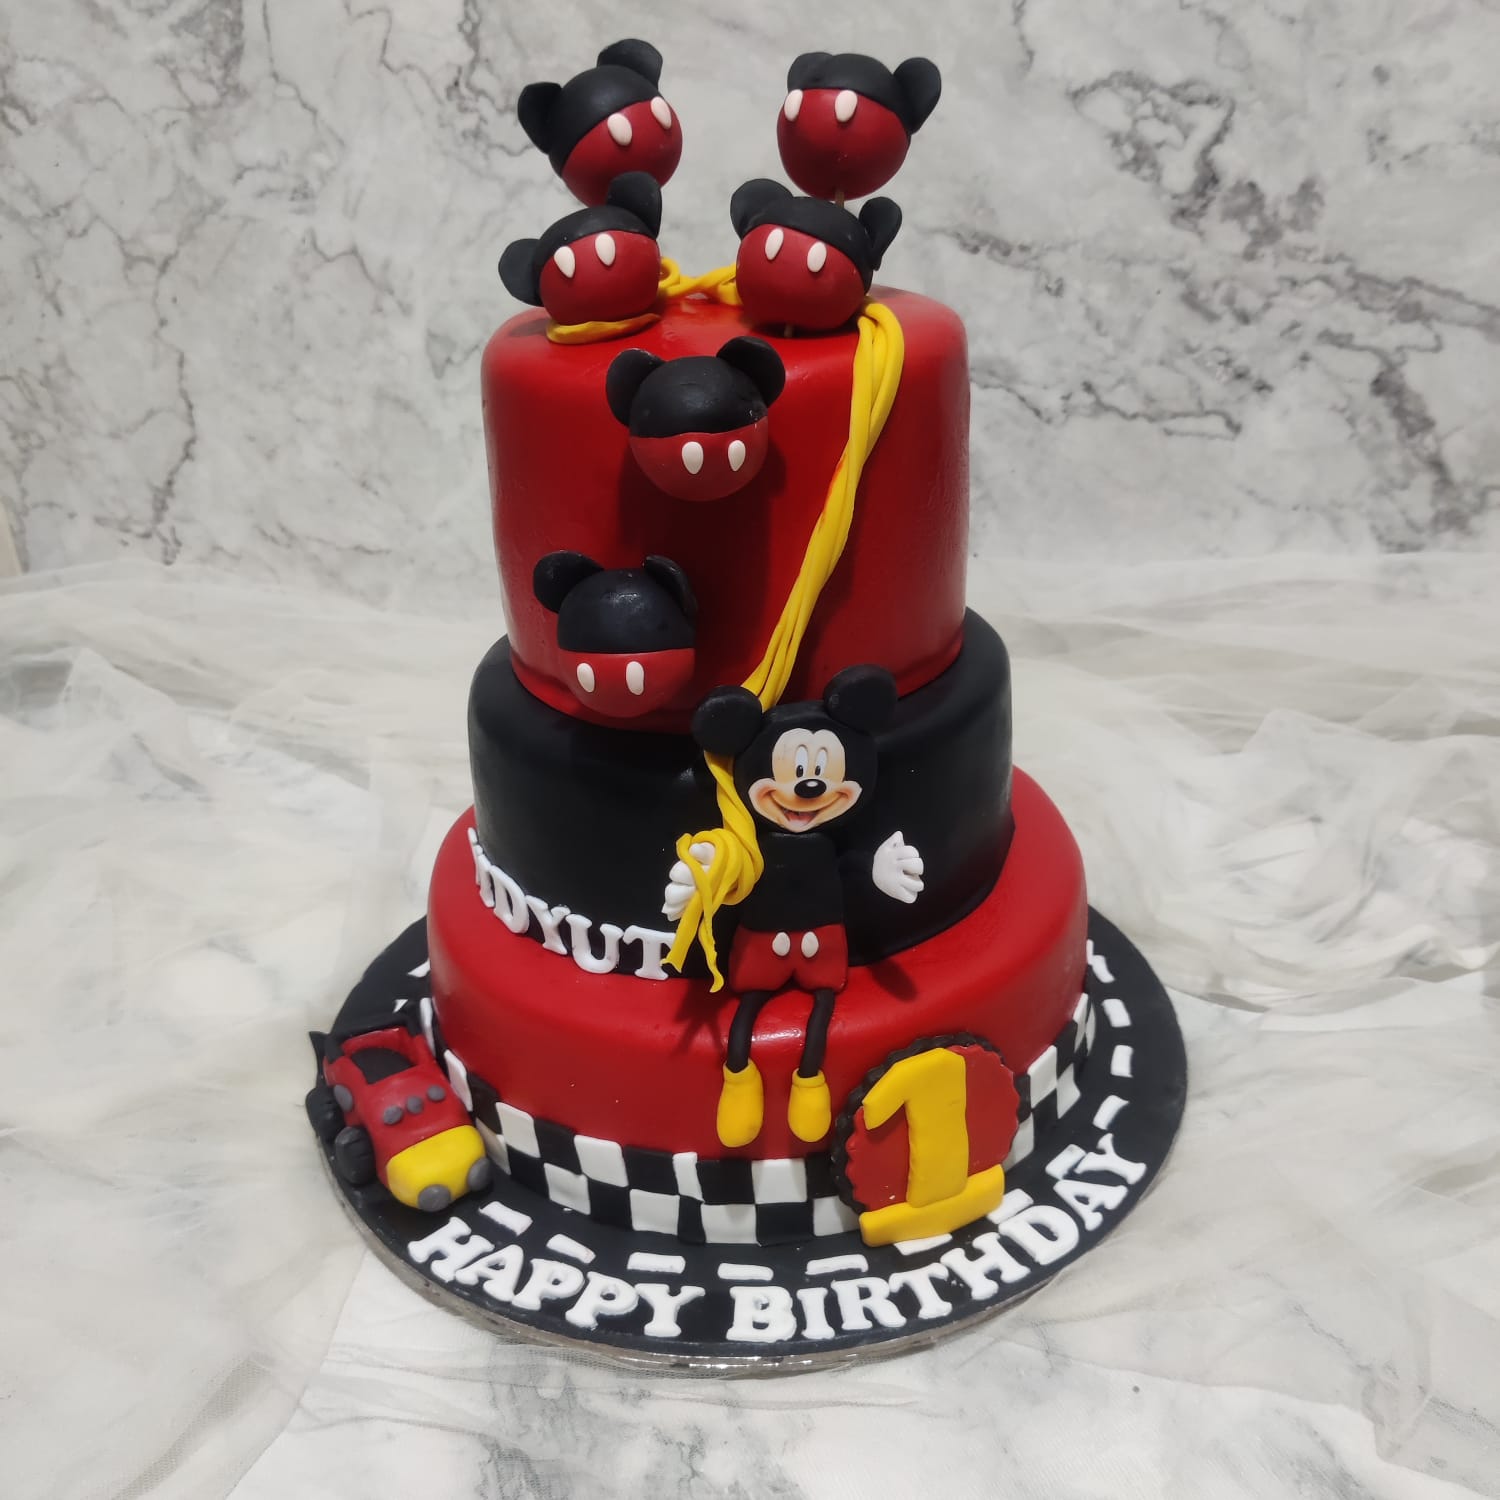 Happy Birthday Cake Toppers Manufacturer Supplier from Delhi India-sonthuy.vn